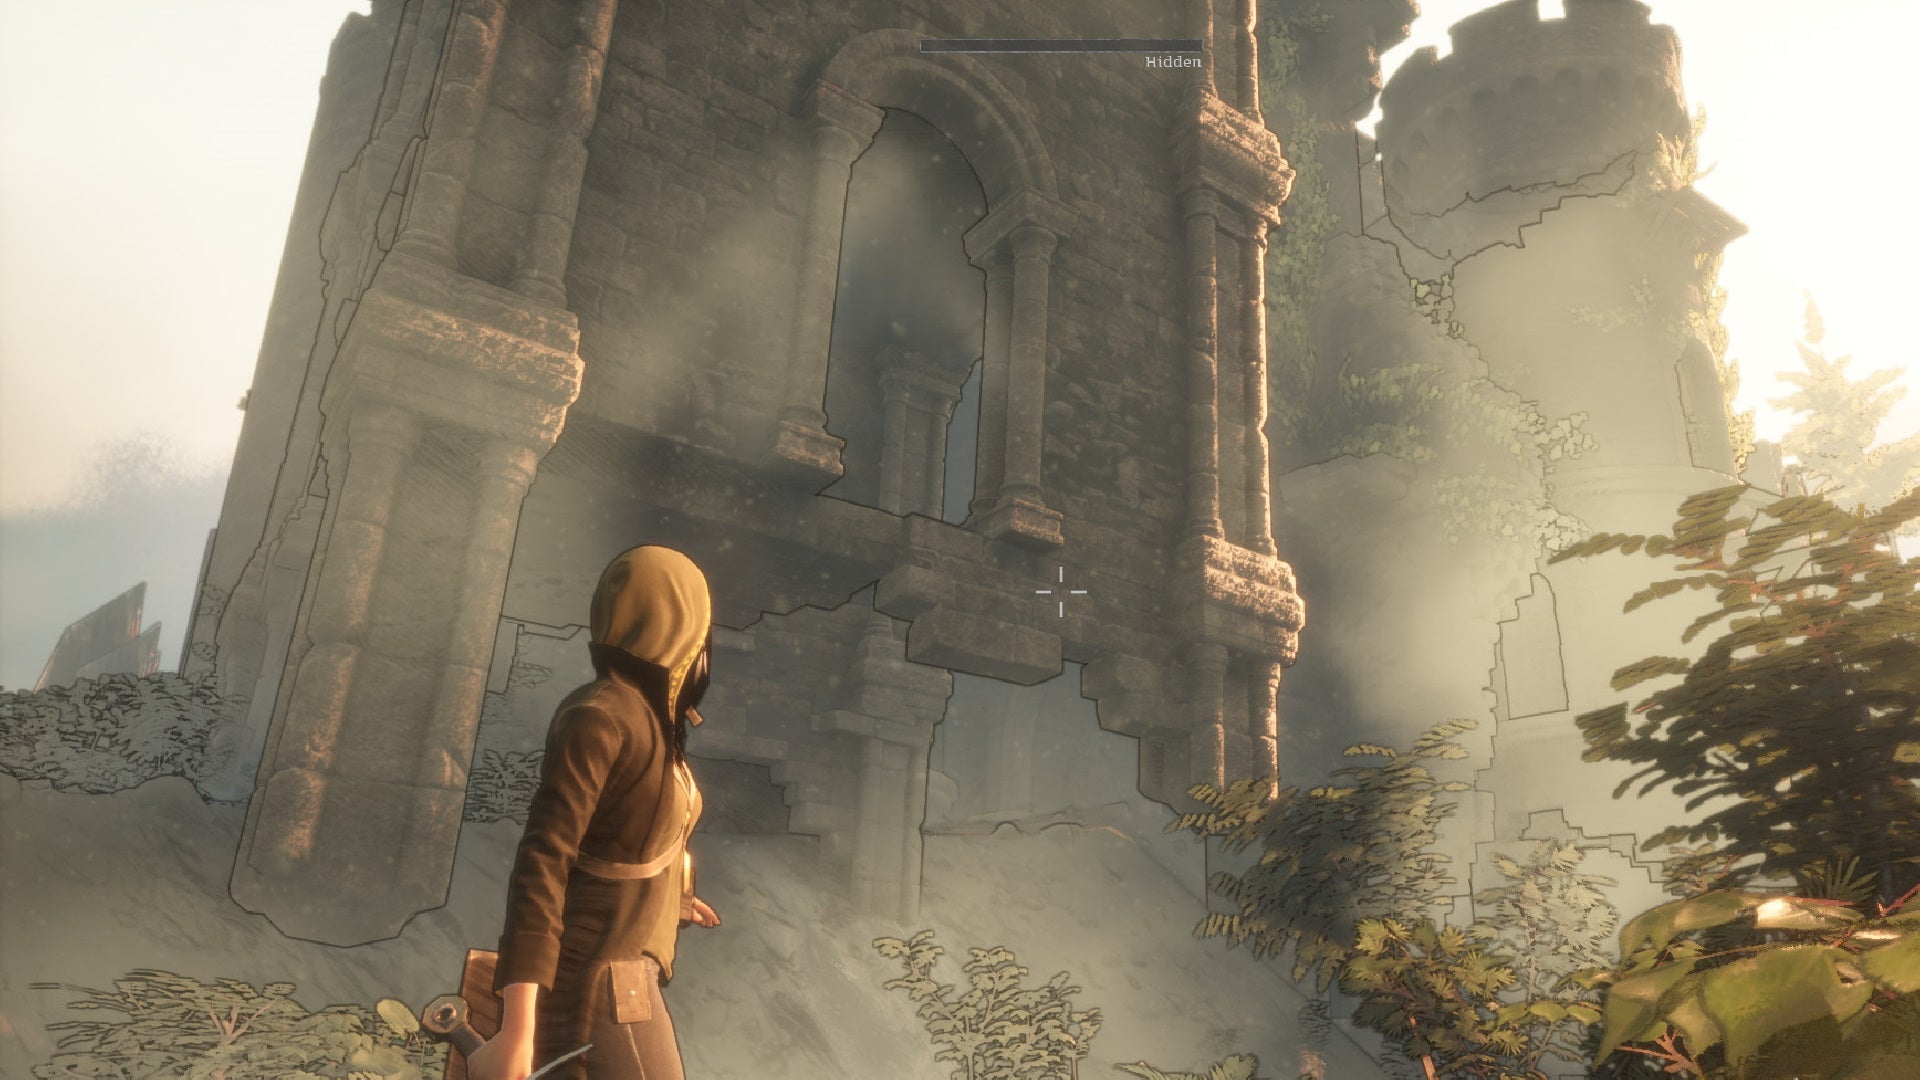 Morgan stands next to a towering structure in Dream Cycle.